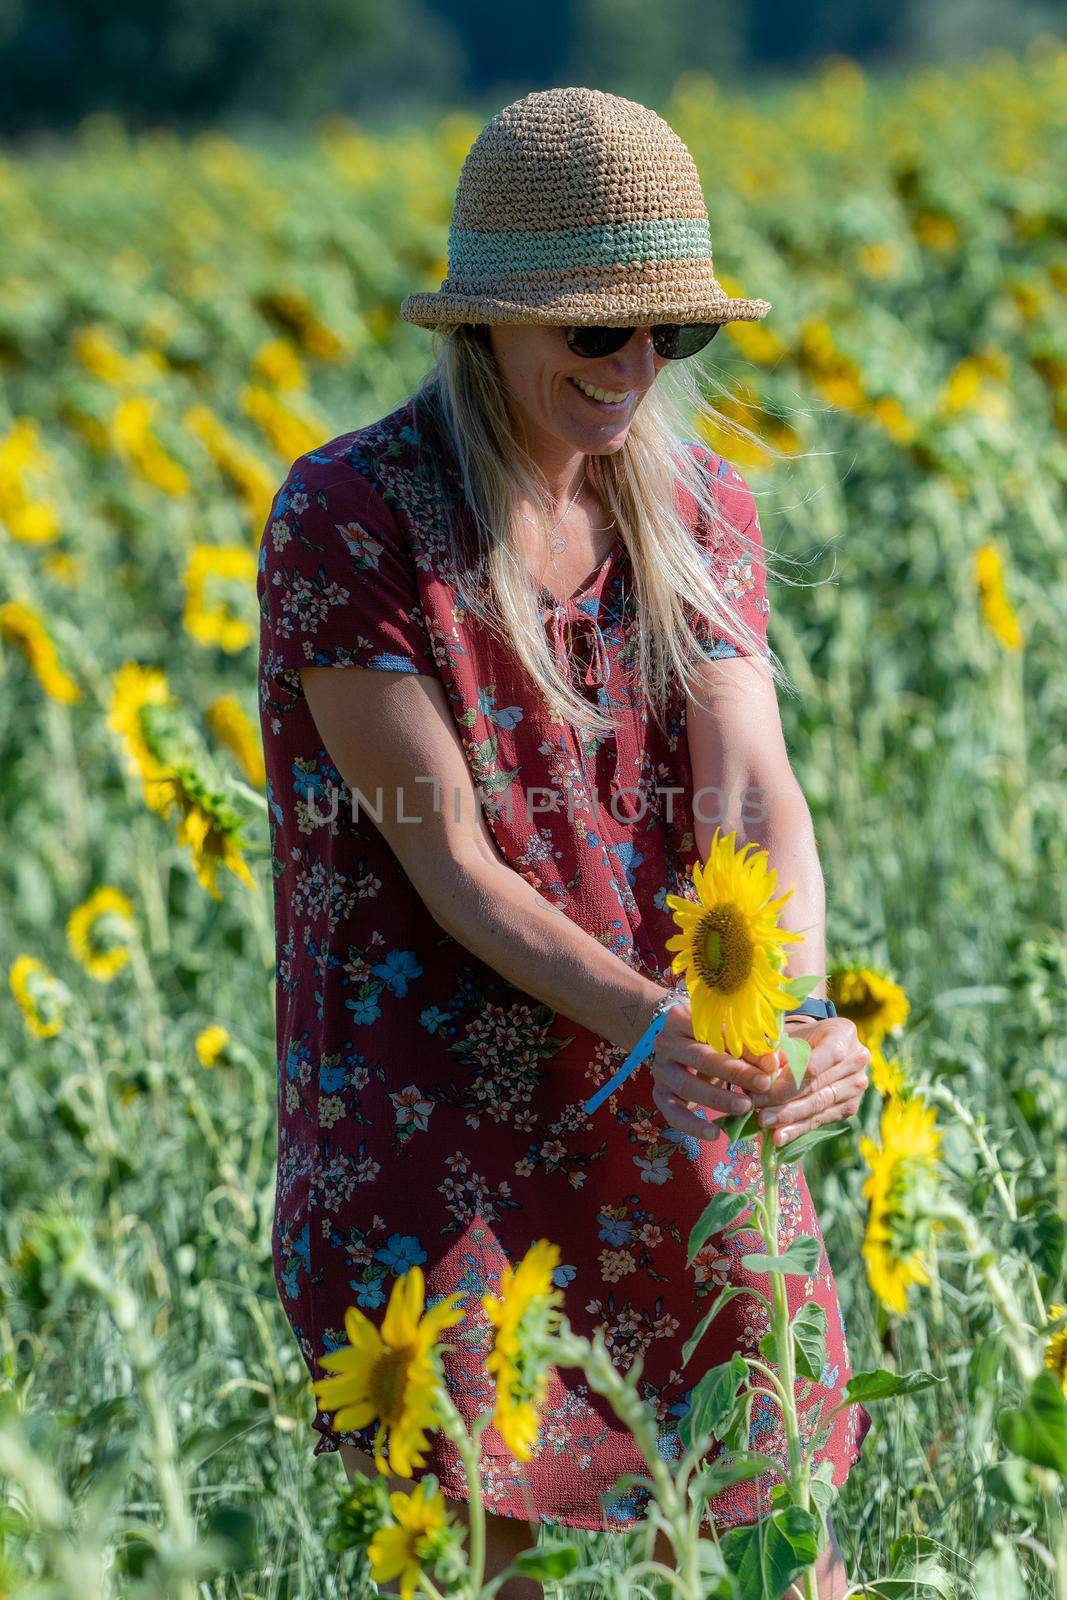 Woman among the sunflowers receive the beautiful afternoon sun.